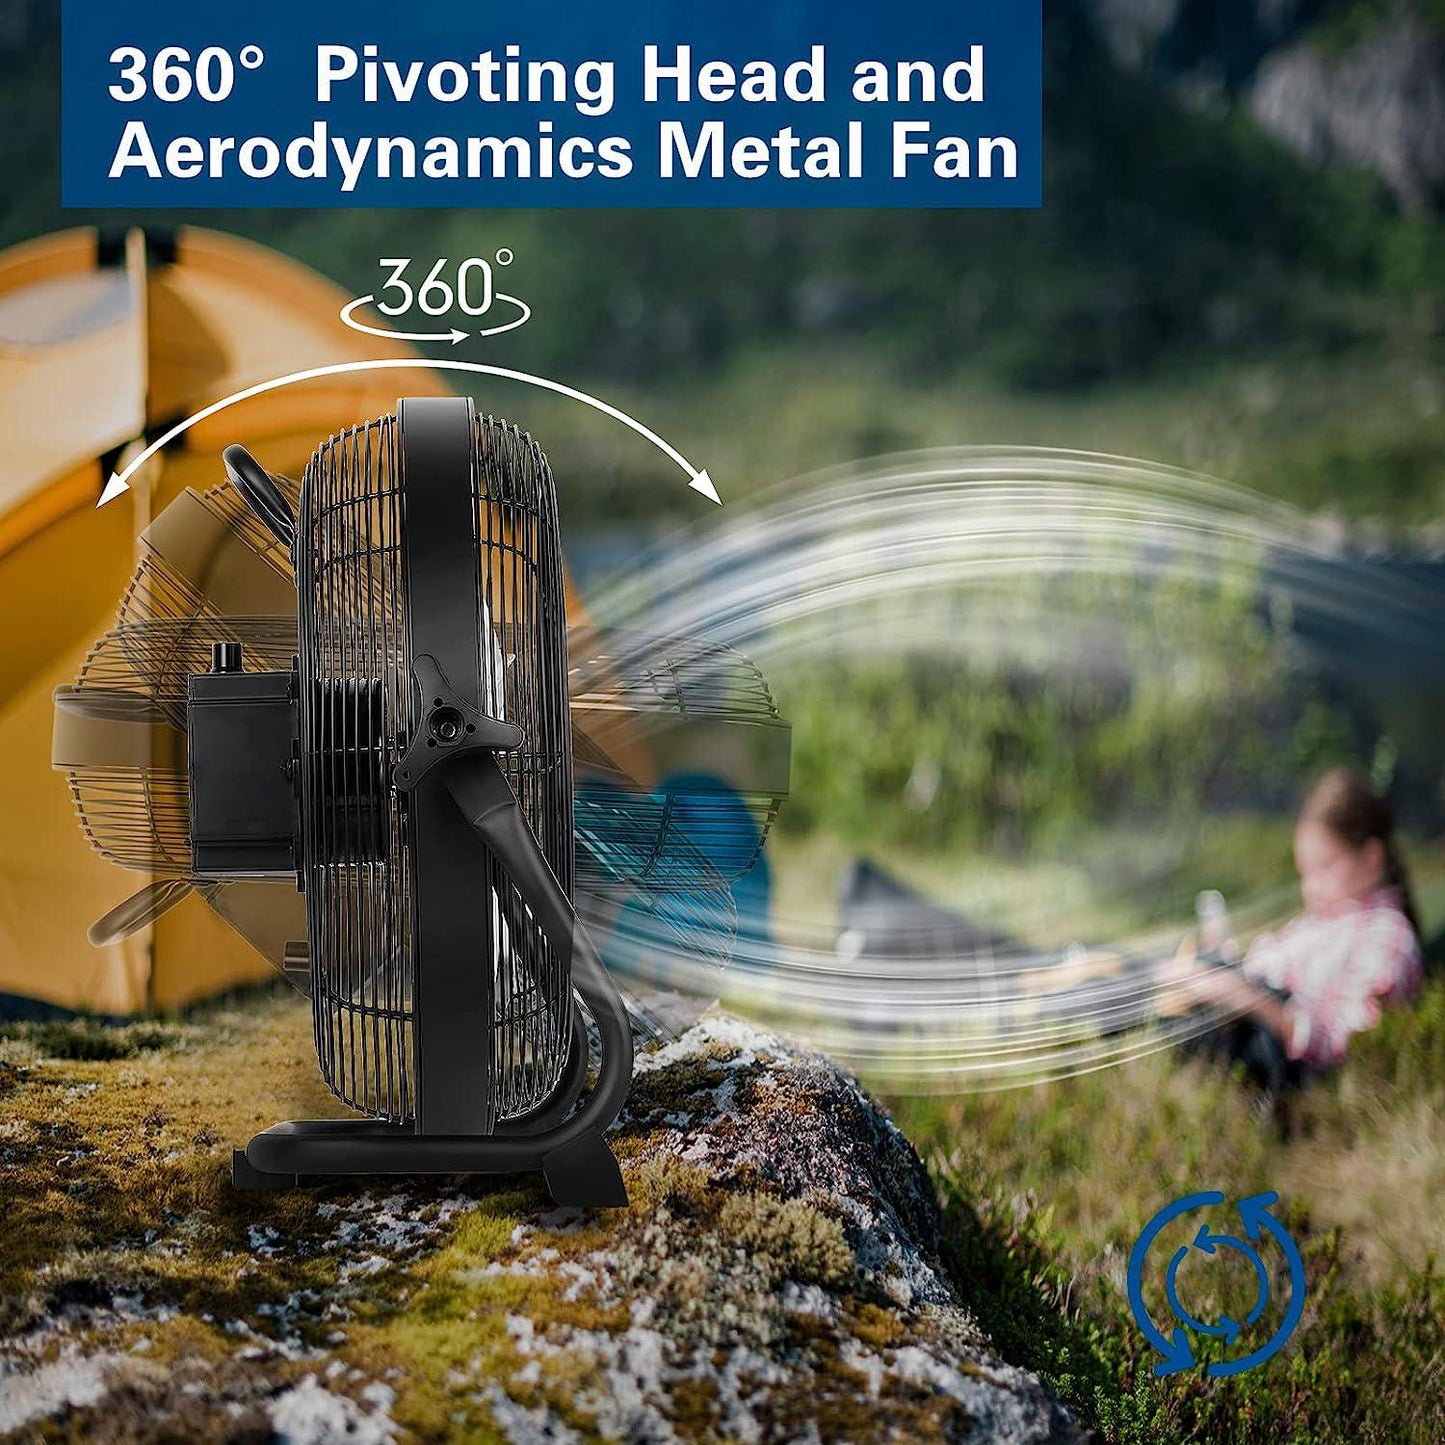 12 Rechargeable Battery Operated Outdoor Floor Fan, 15600mAh Battery Powered High Velocity Portable Fan with Metal Blade, USB Output